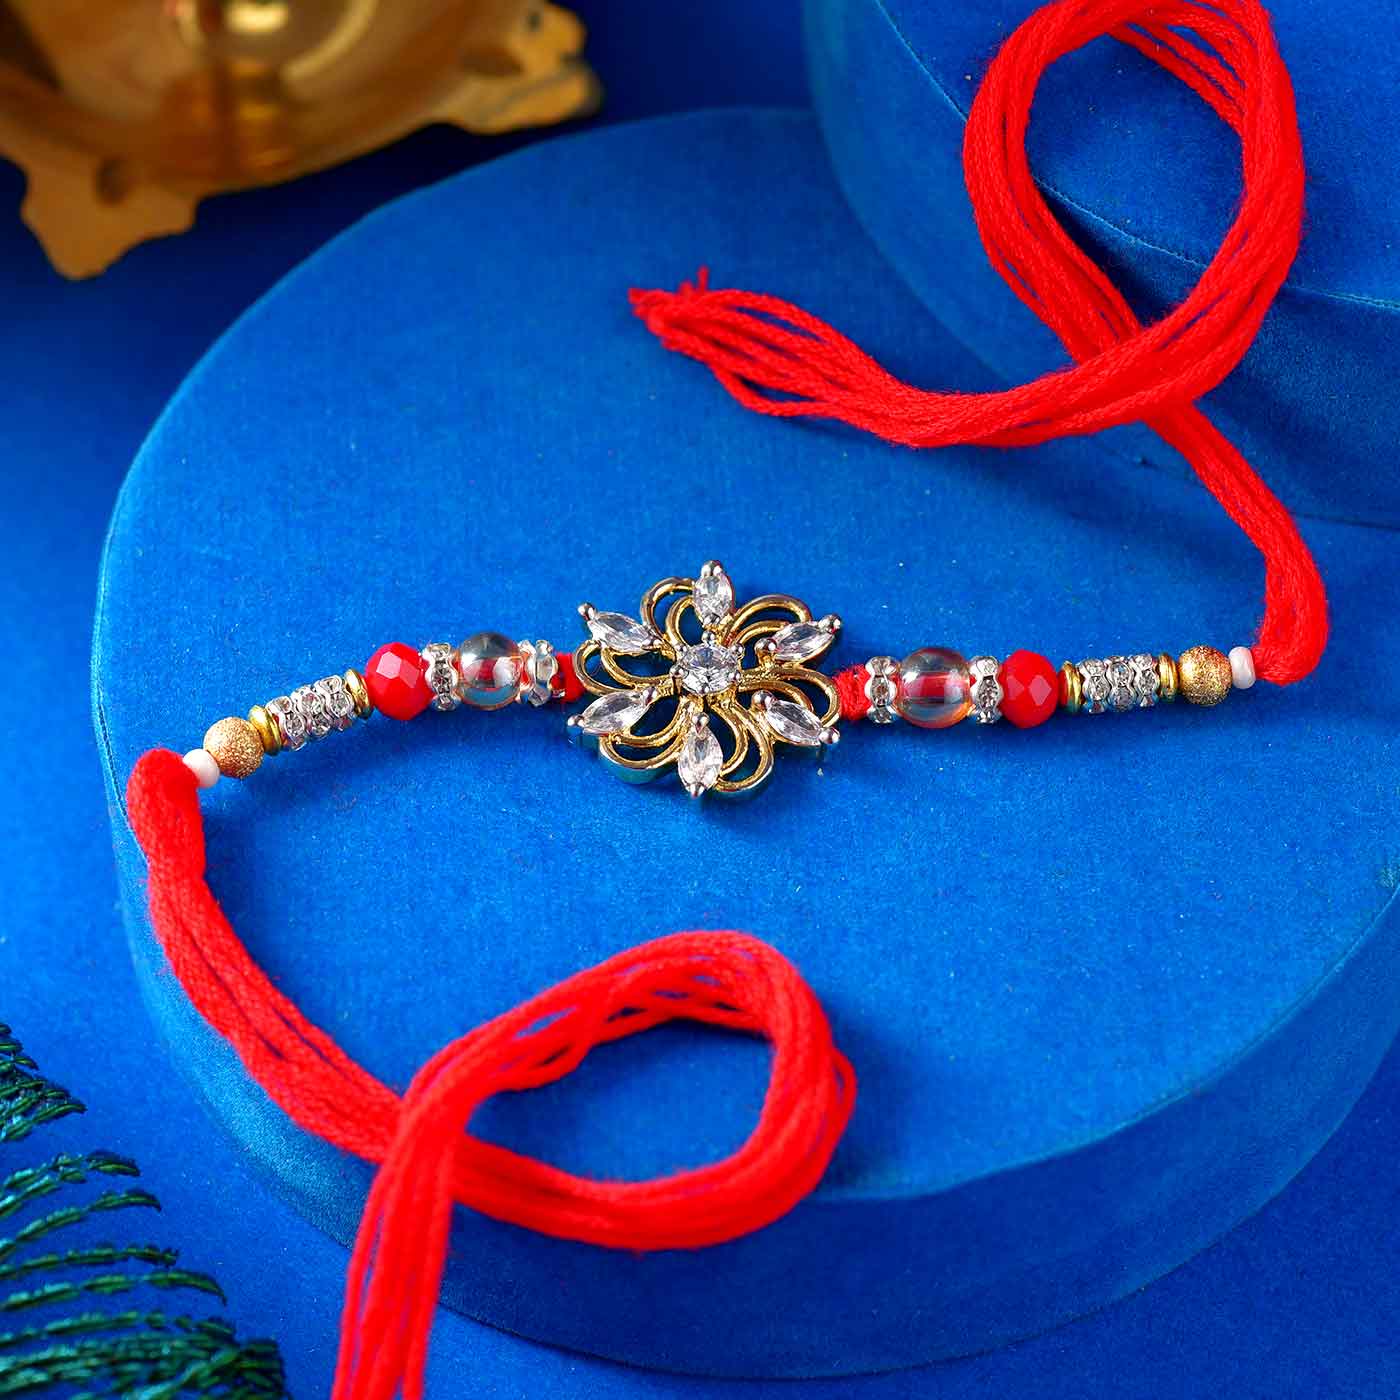 Striking Floral AD Rakhi with Red Pearls - 12 Pcs Pack